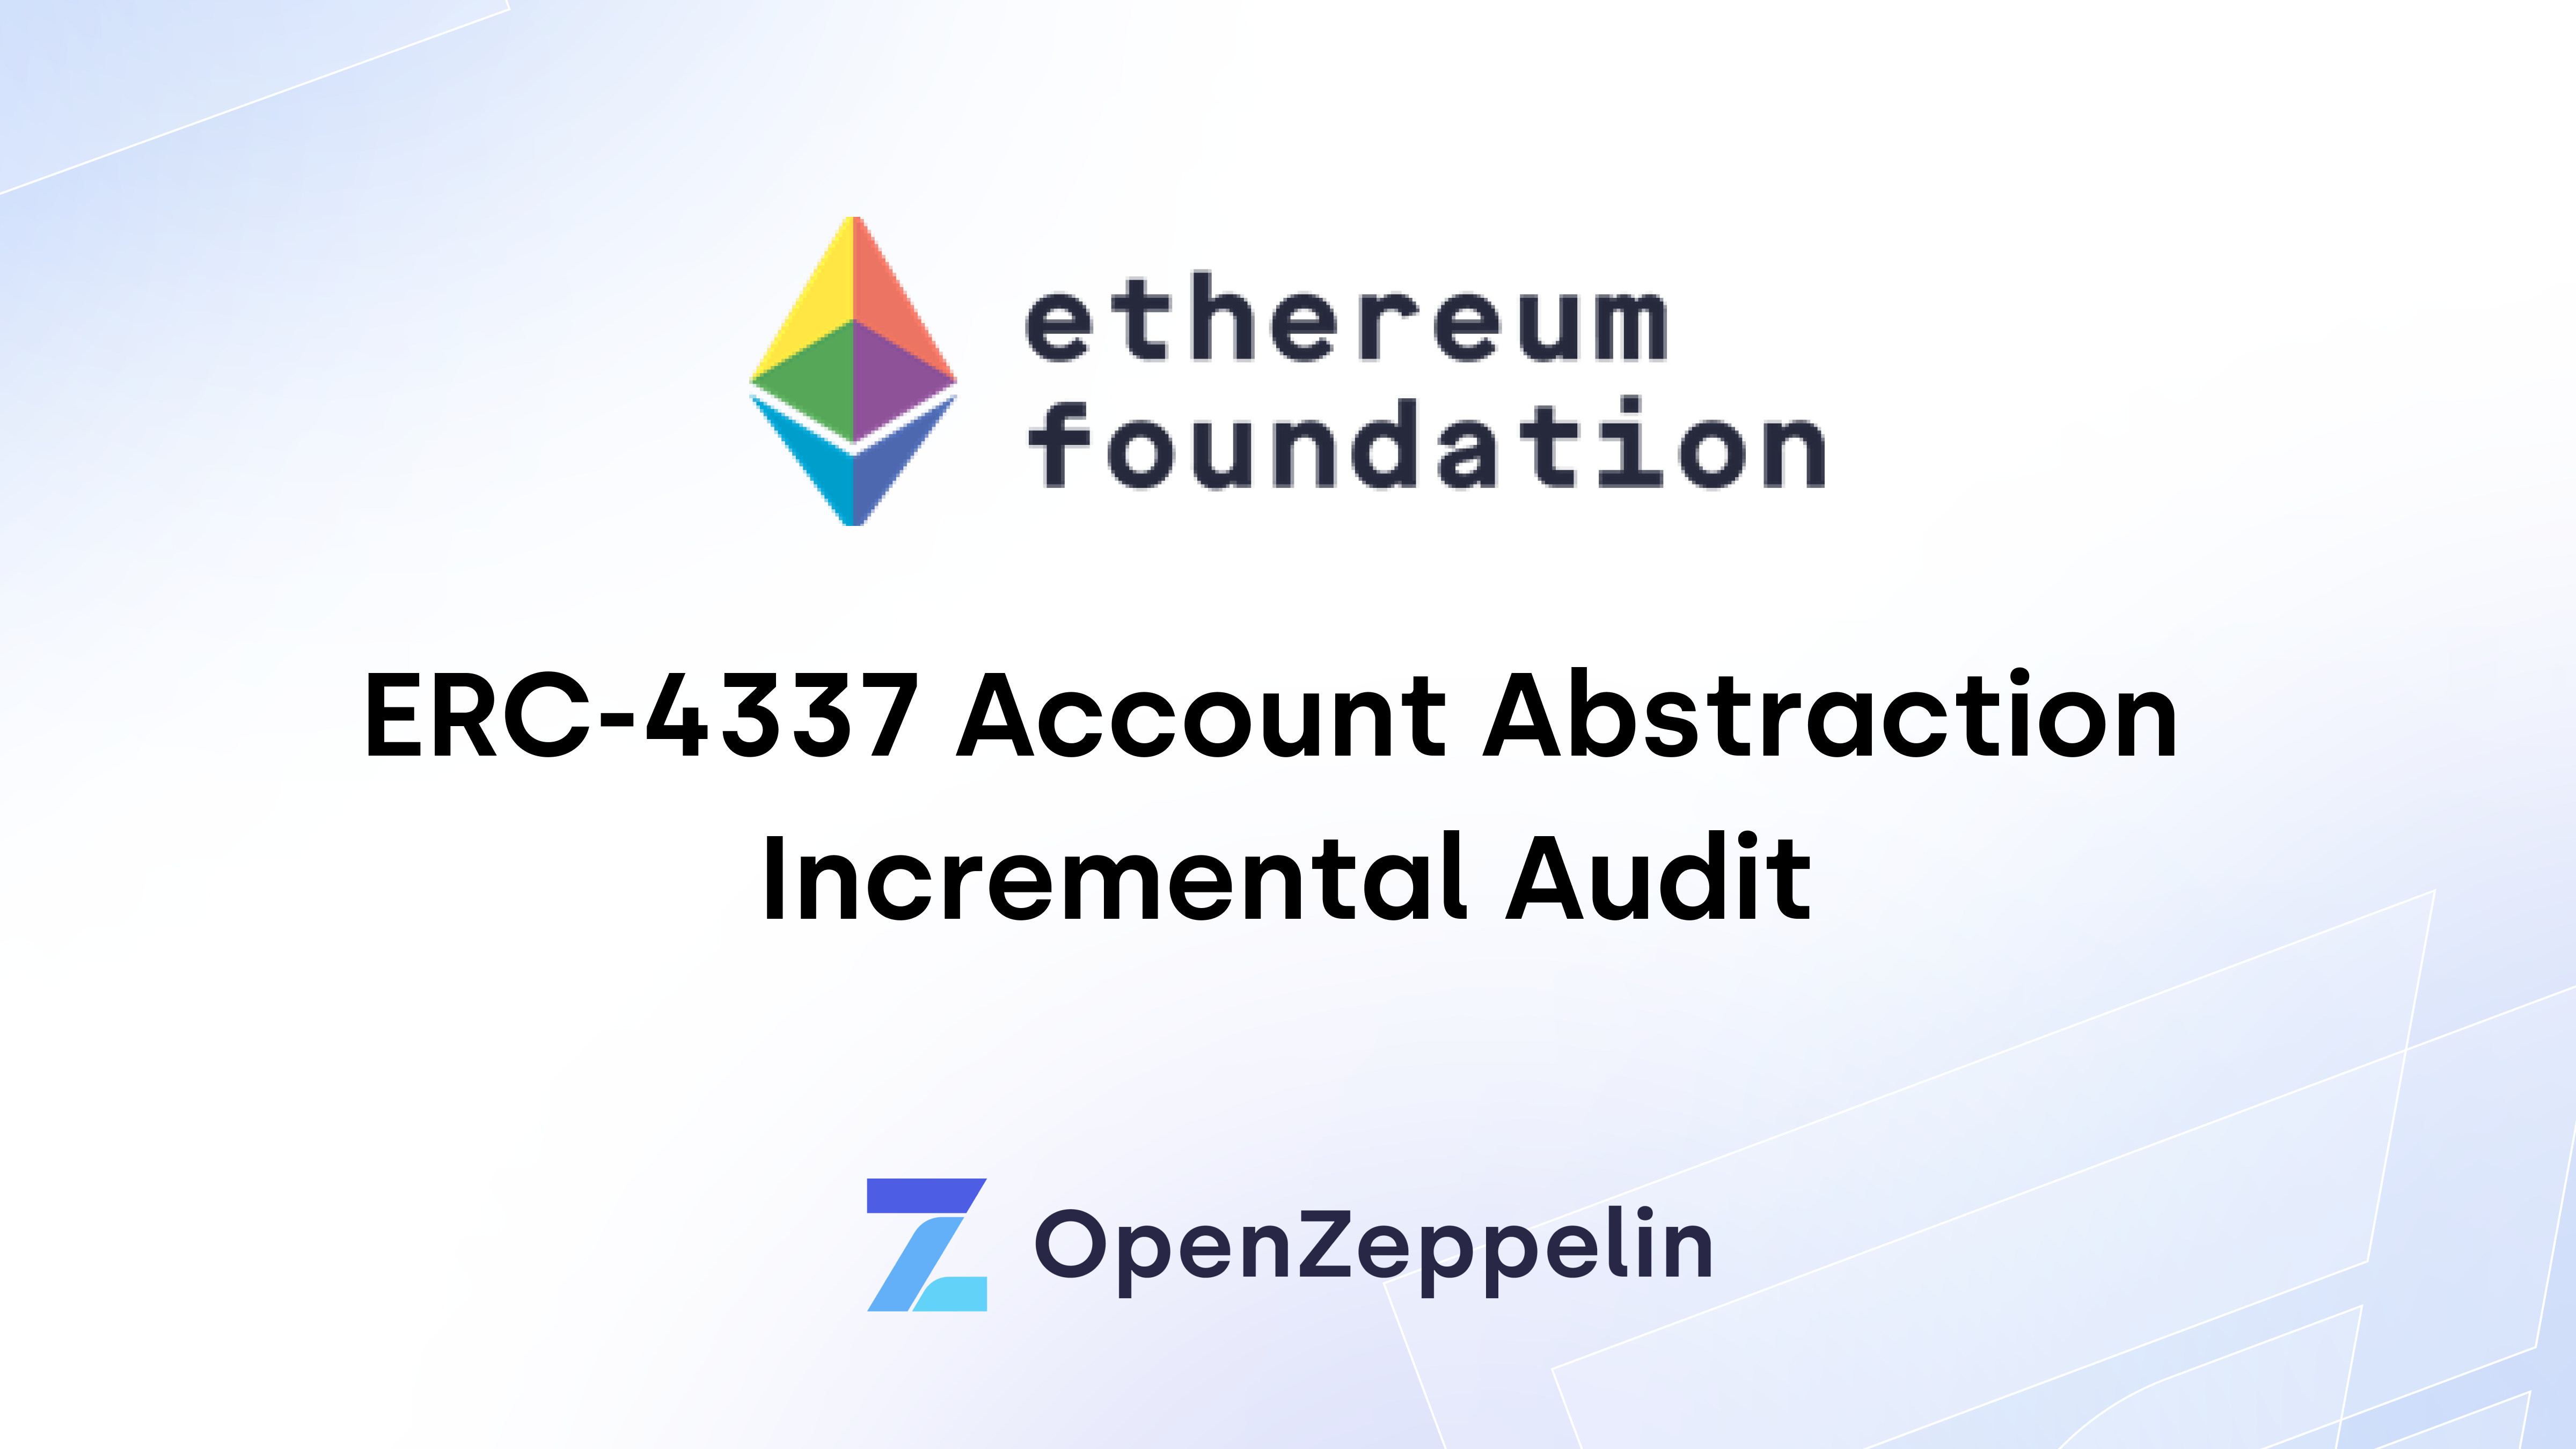 ERC-4337 Account Abstraction Incremental Audit Featured Image